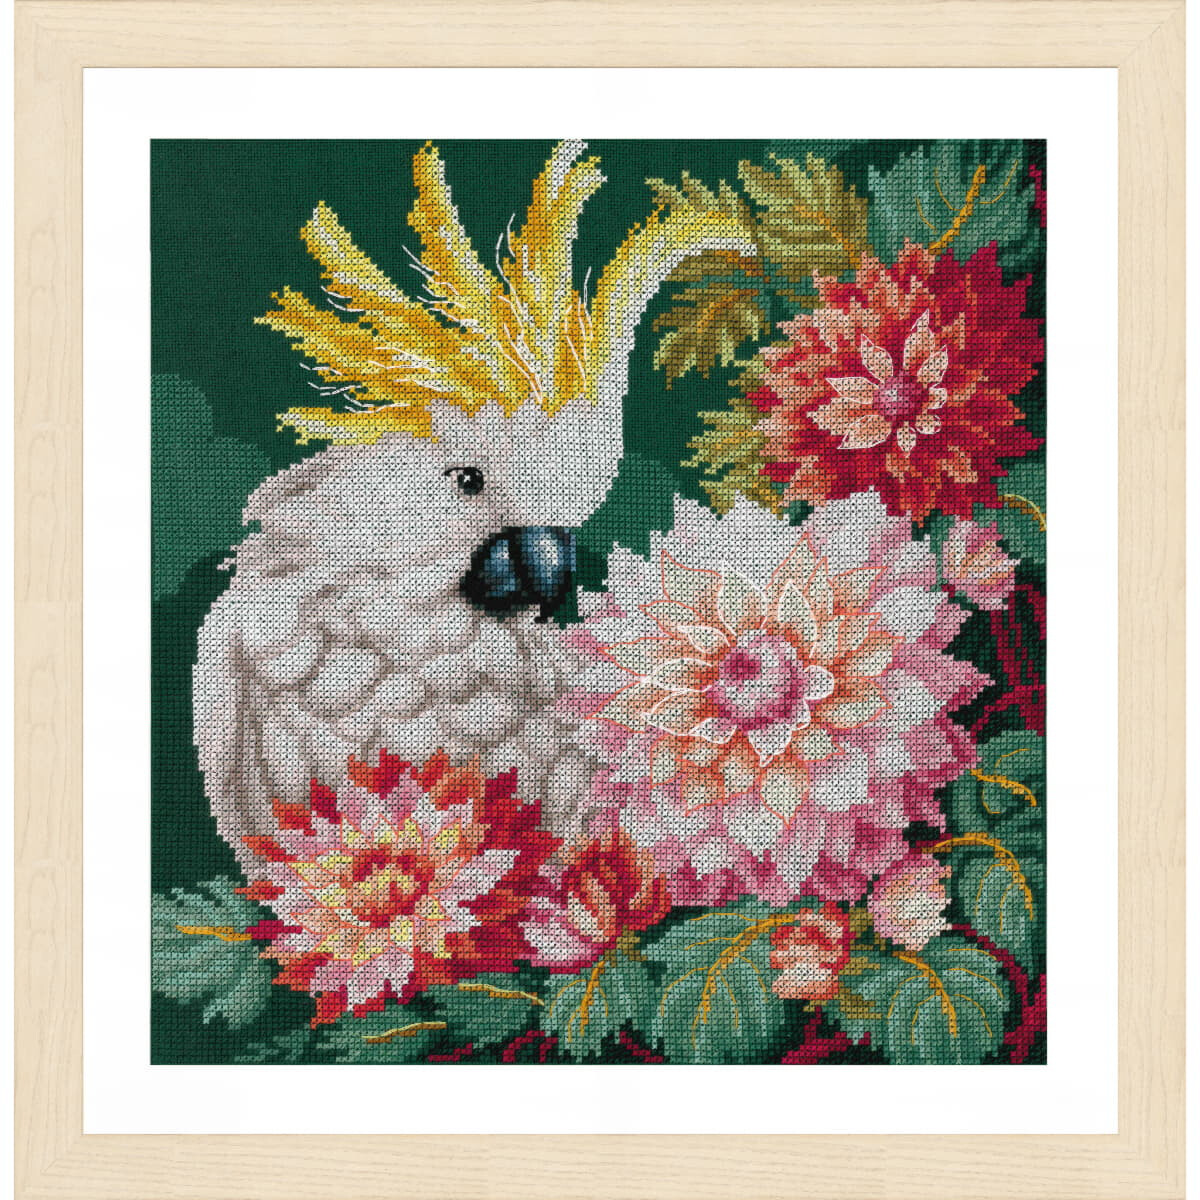 A framed Lanarte embroidery pack depicting a white...